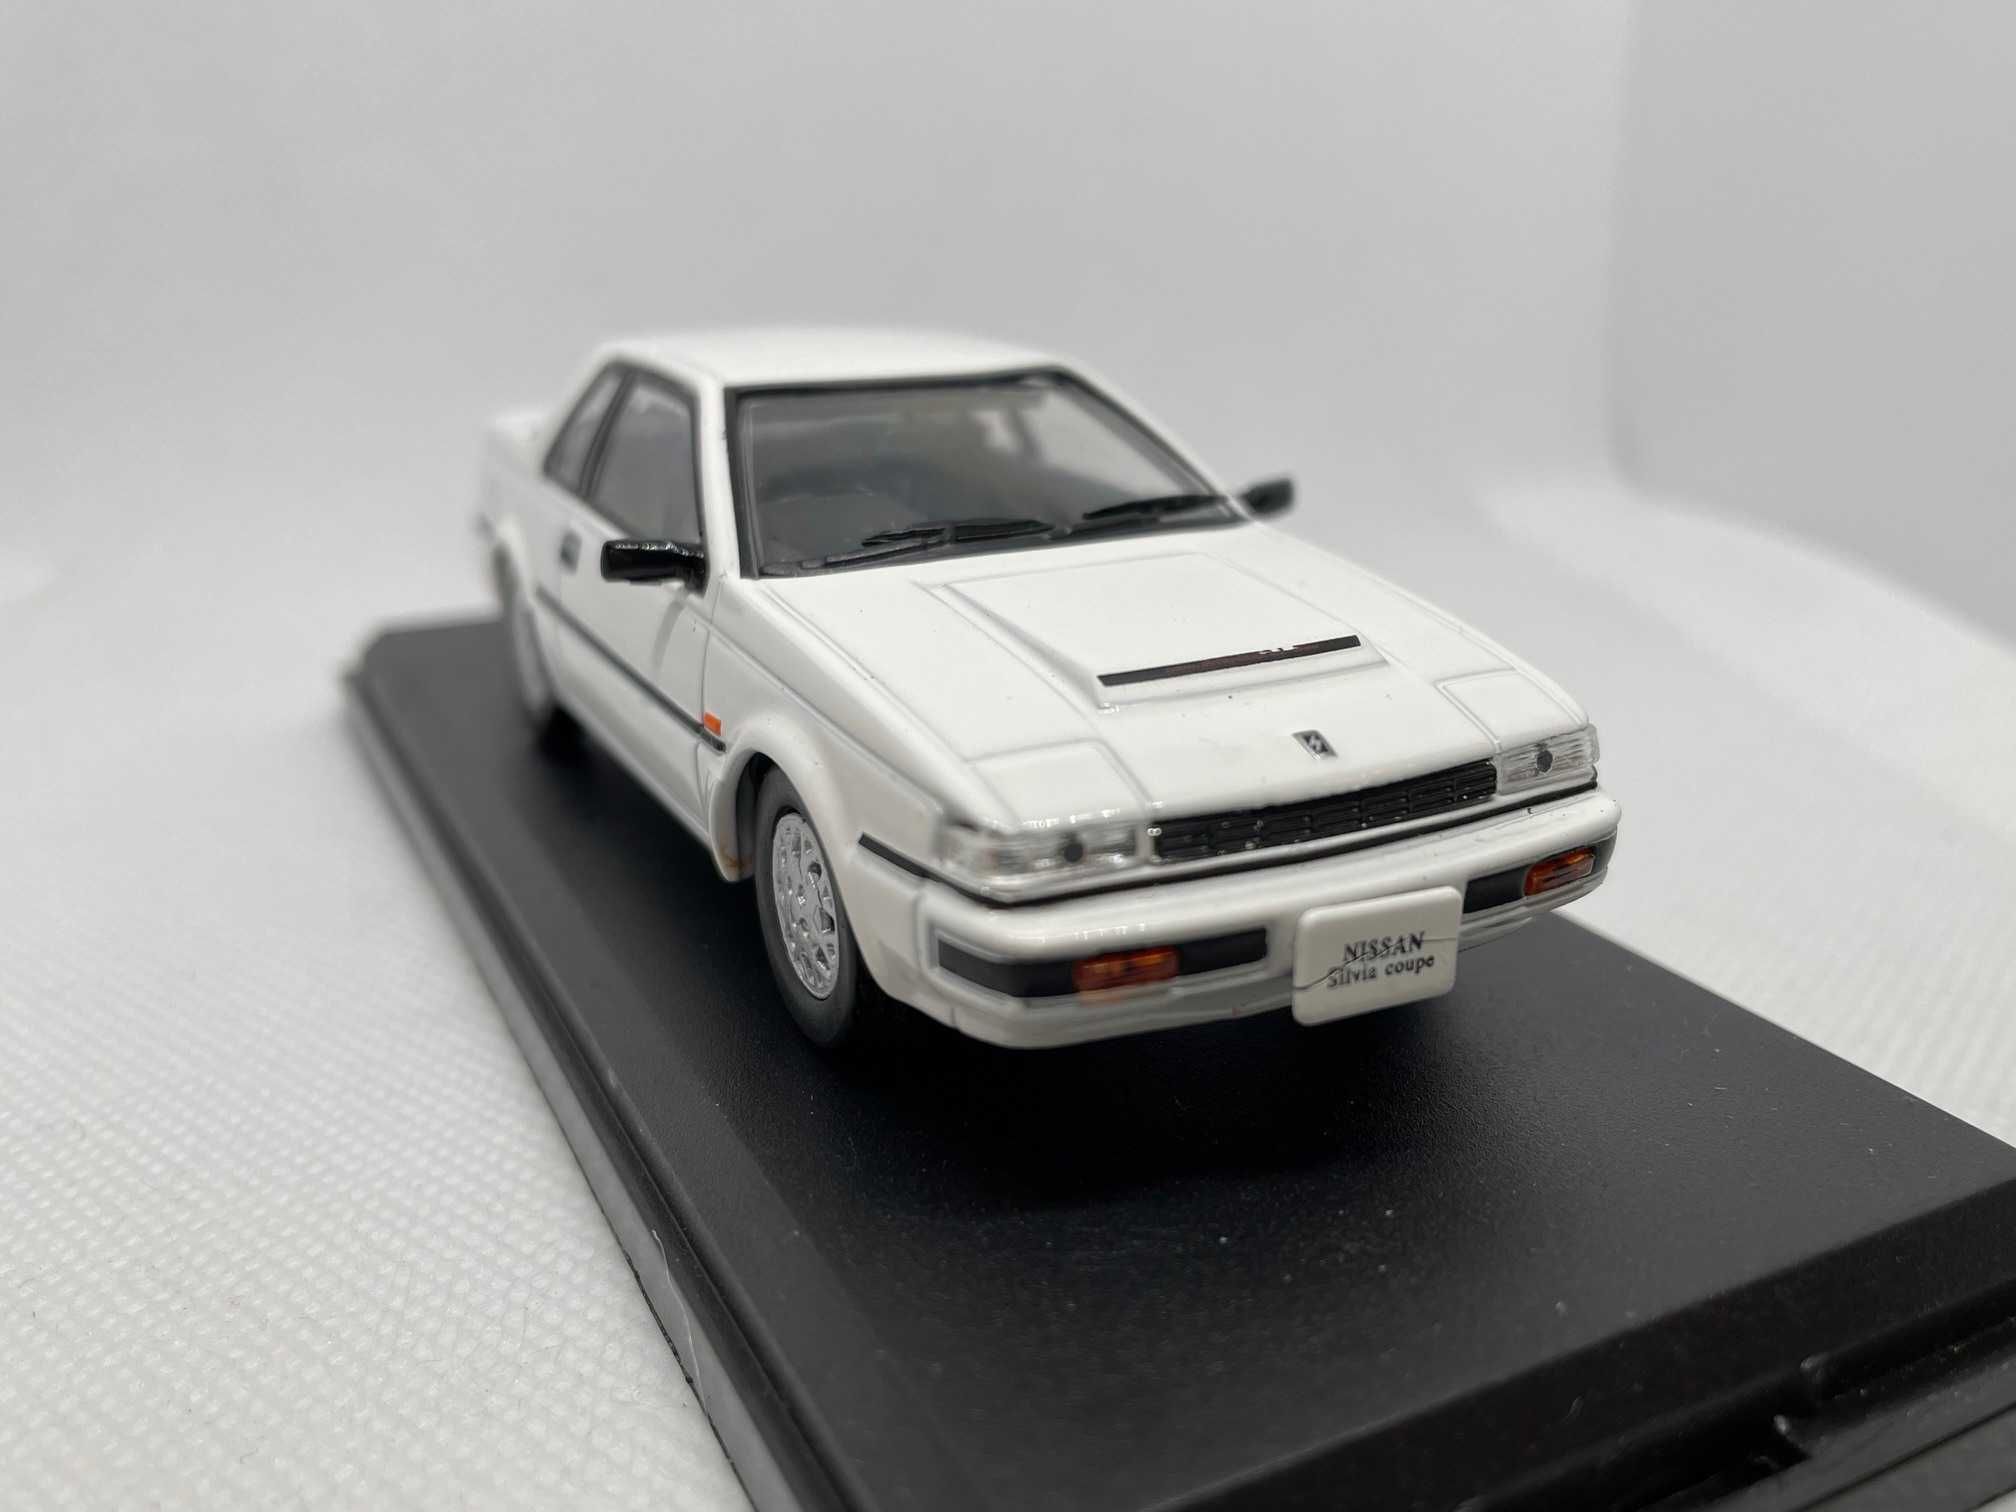 1/43 Nissan Silvia Coupe 1983 Norev